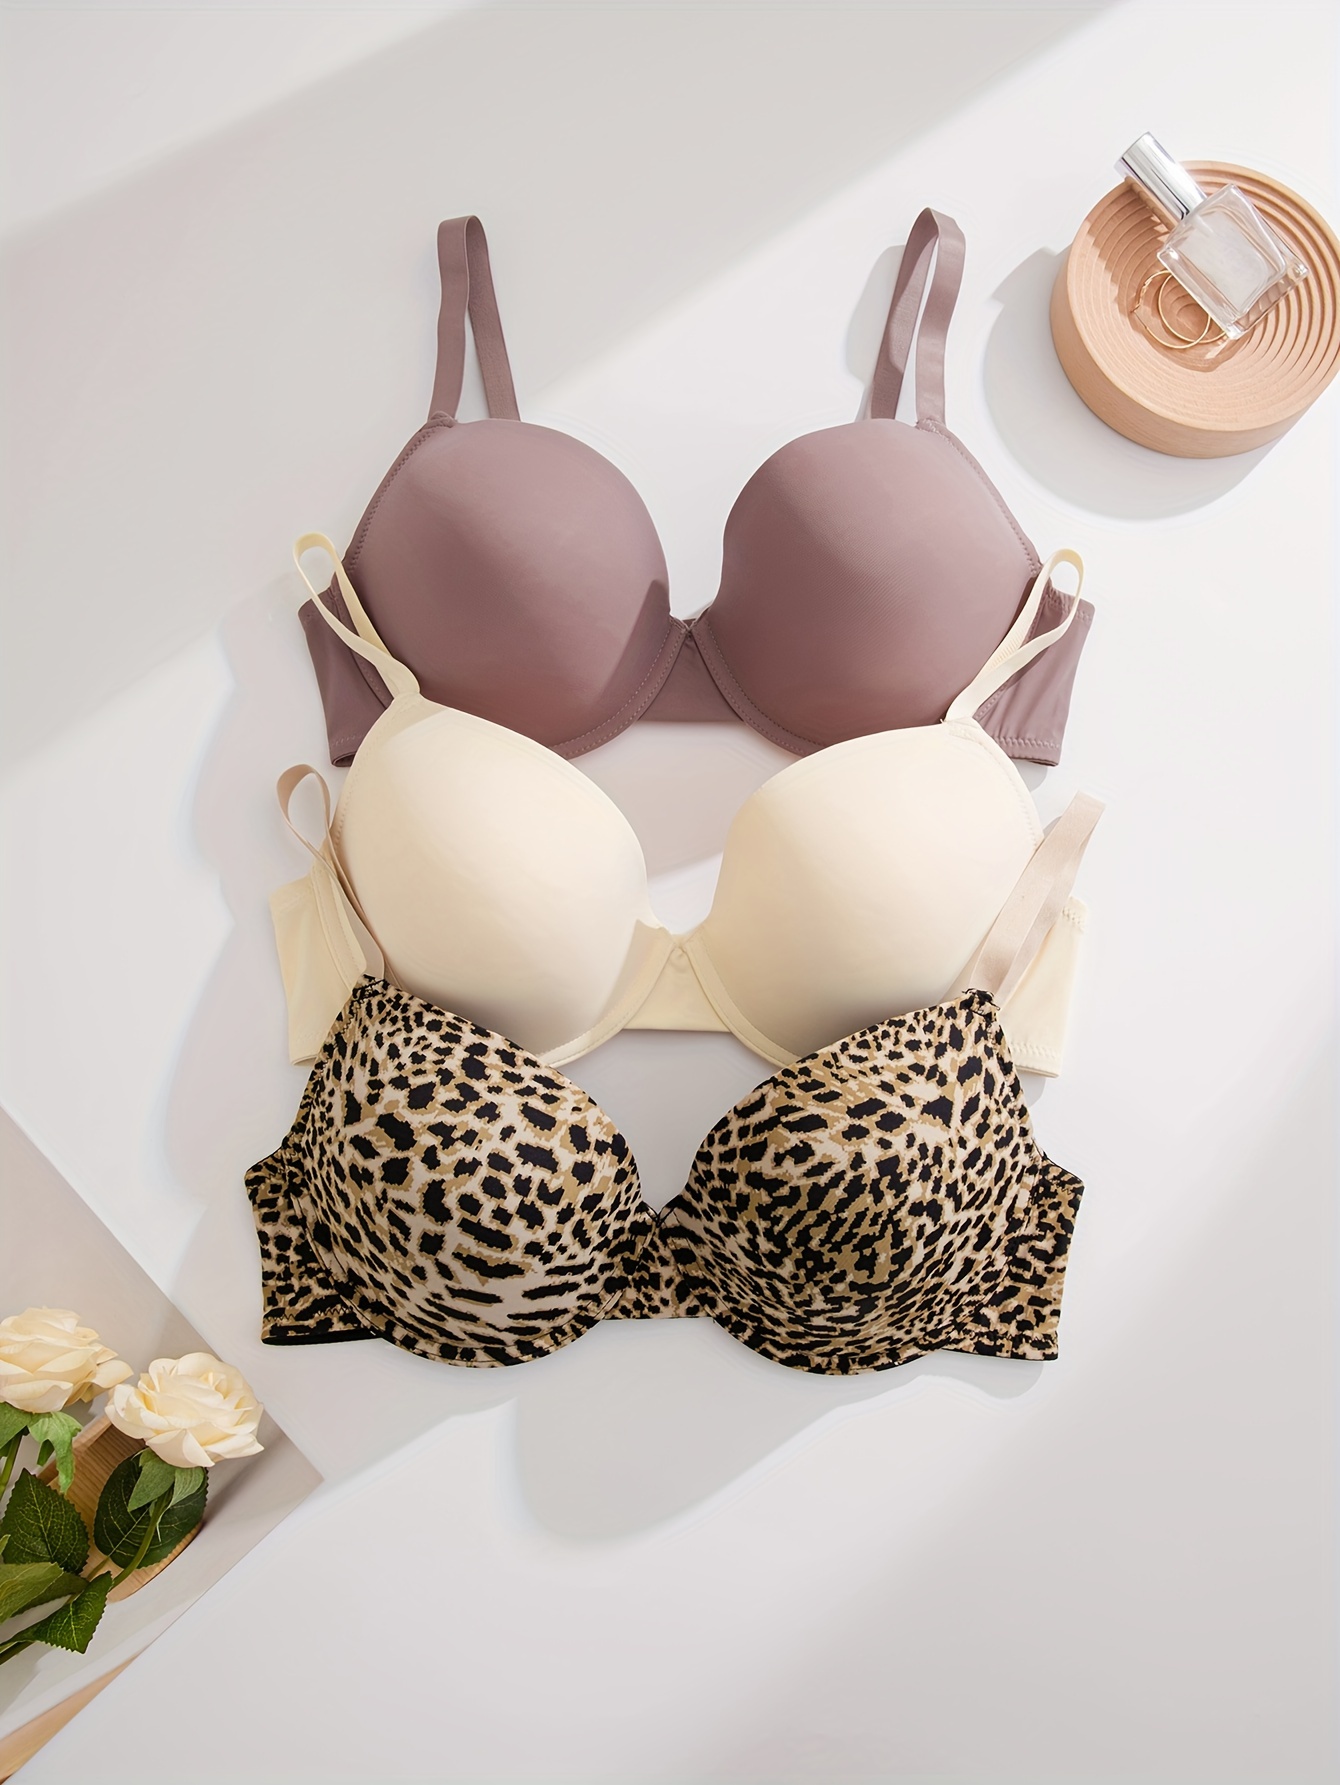 72 Bulk Women's Soft Bras Assorted Colors And Sizes With Leopard